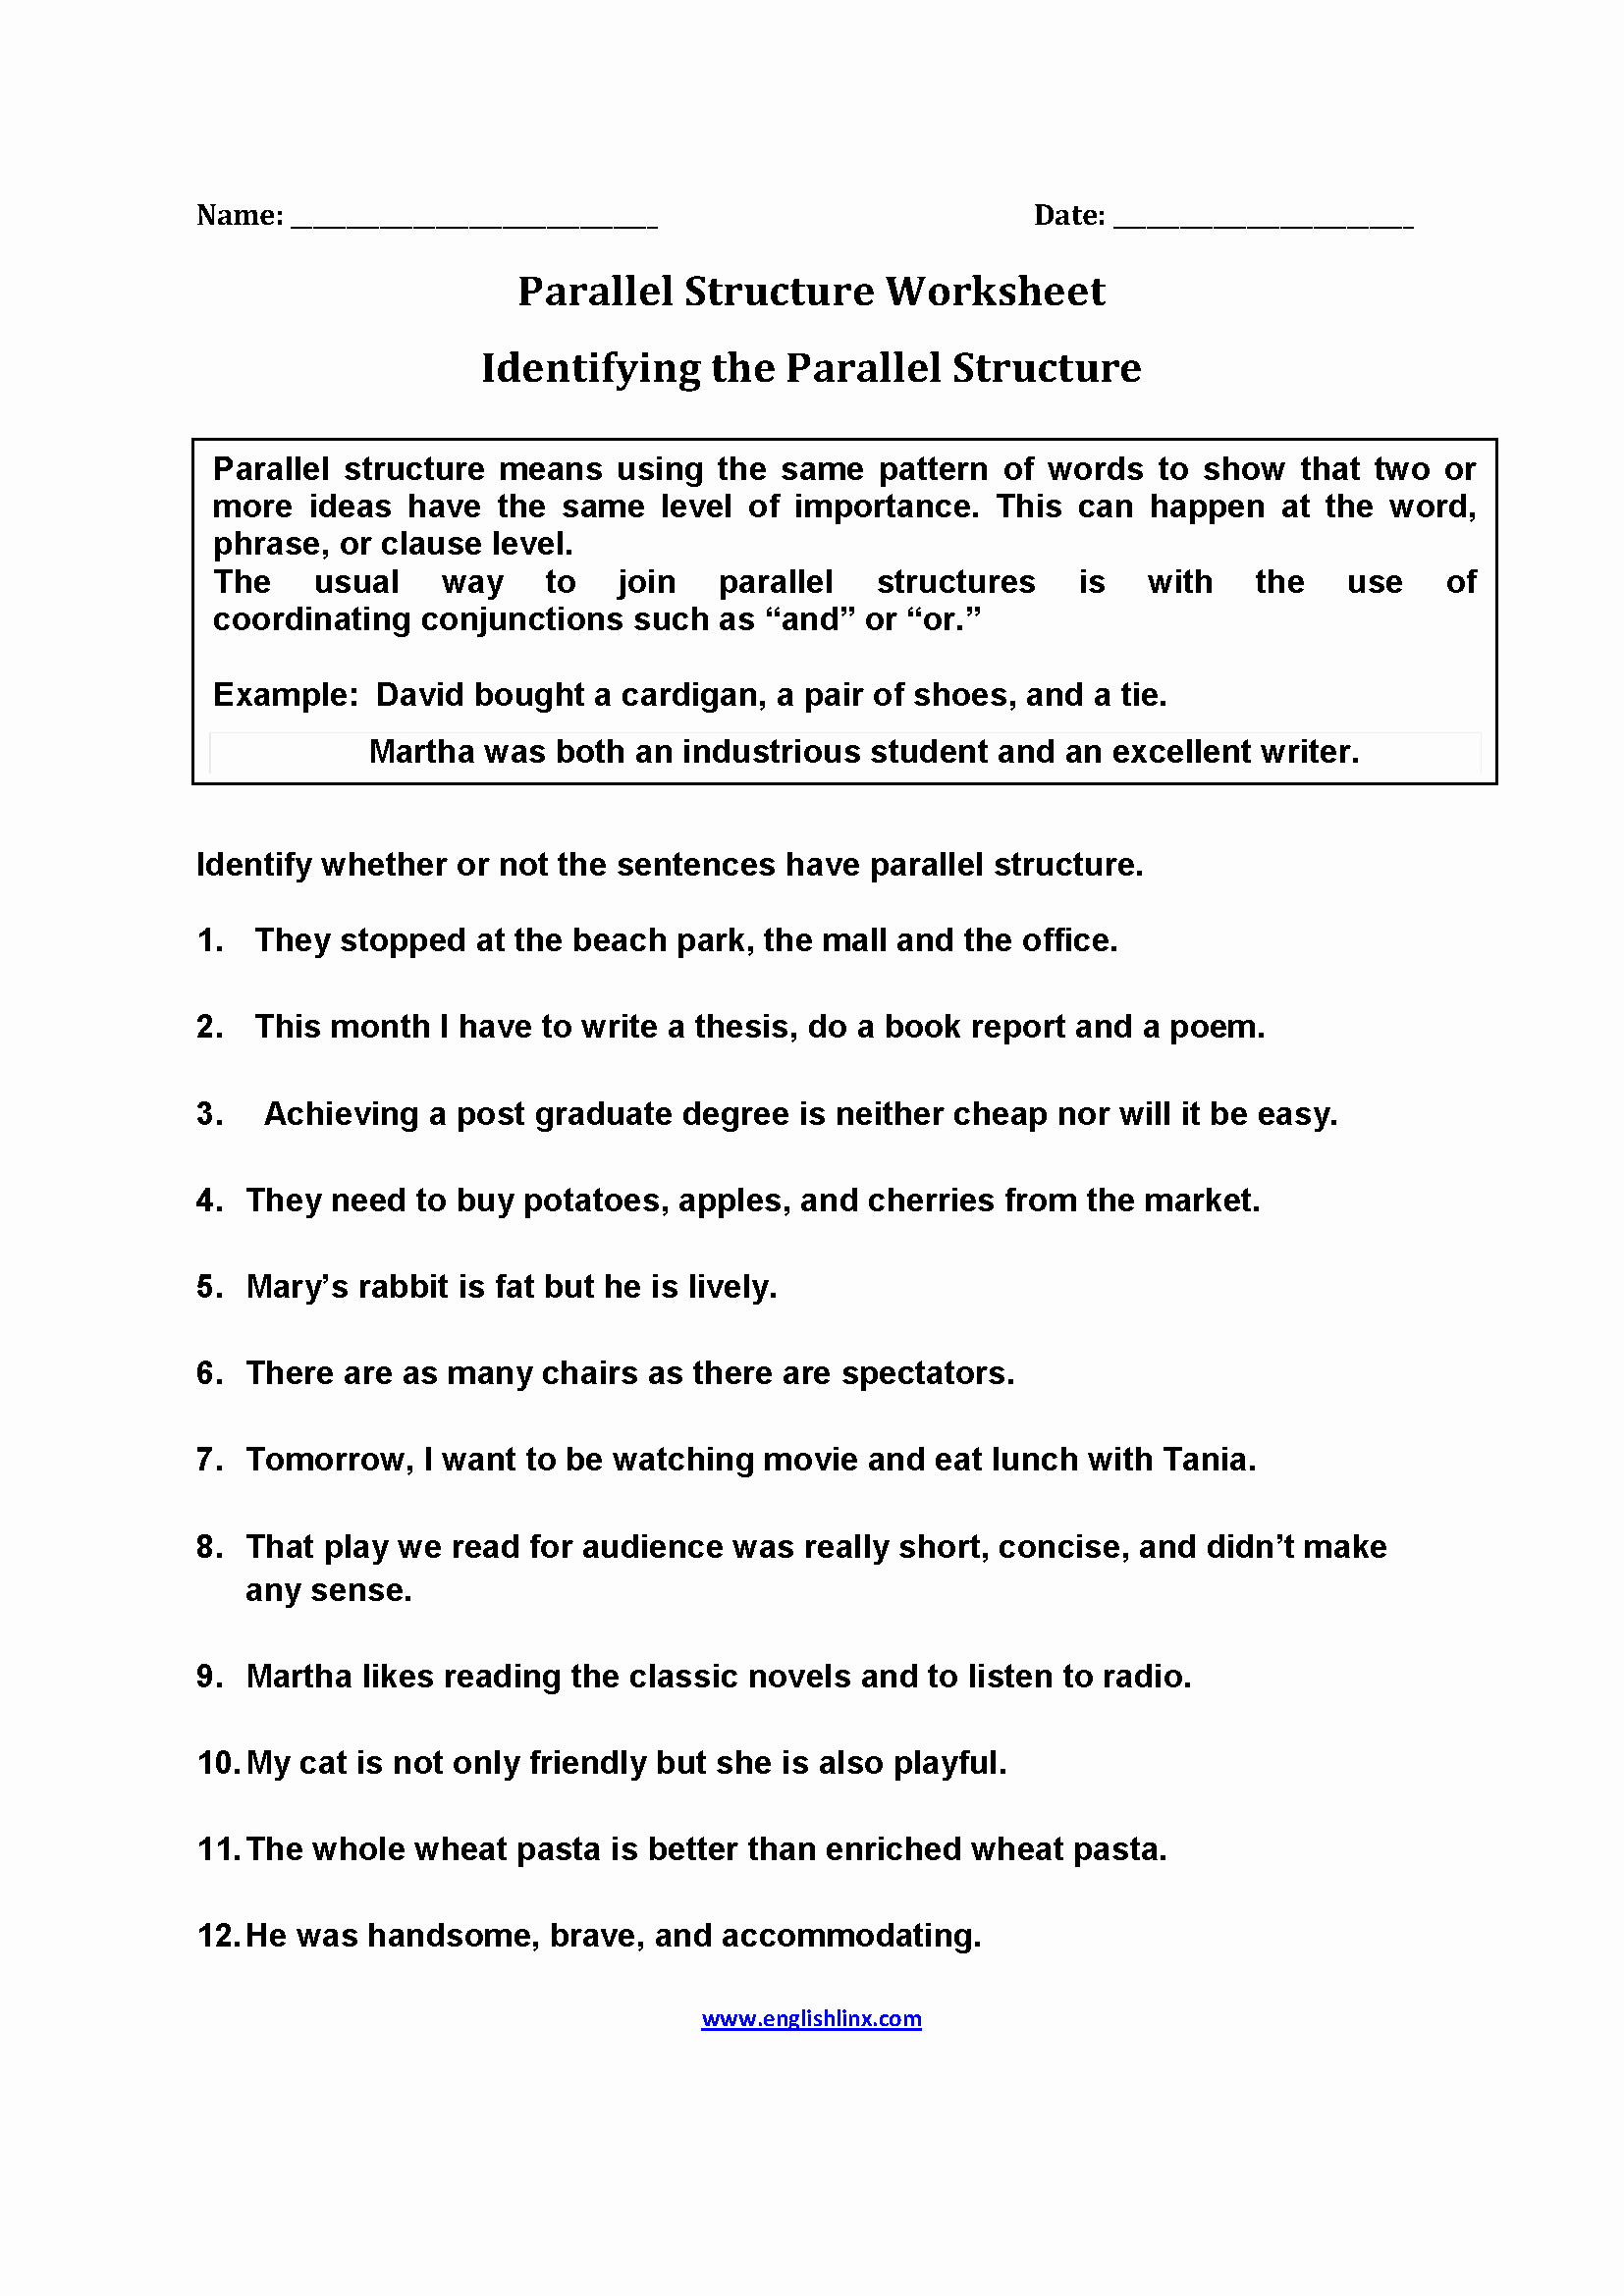 Parallel Structure Worksheet with Answers New Englishlinx